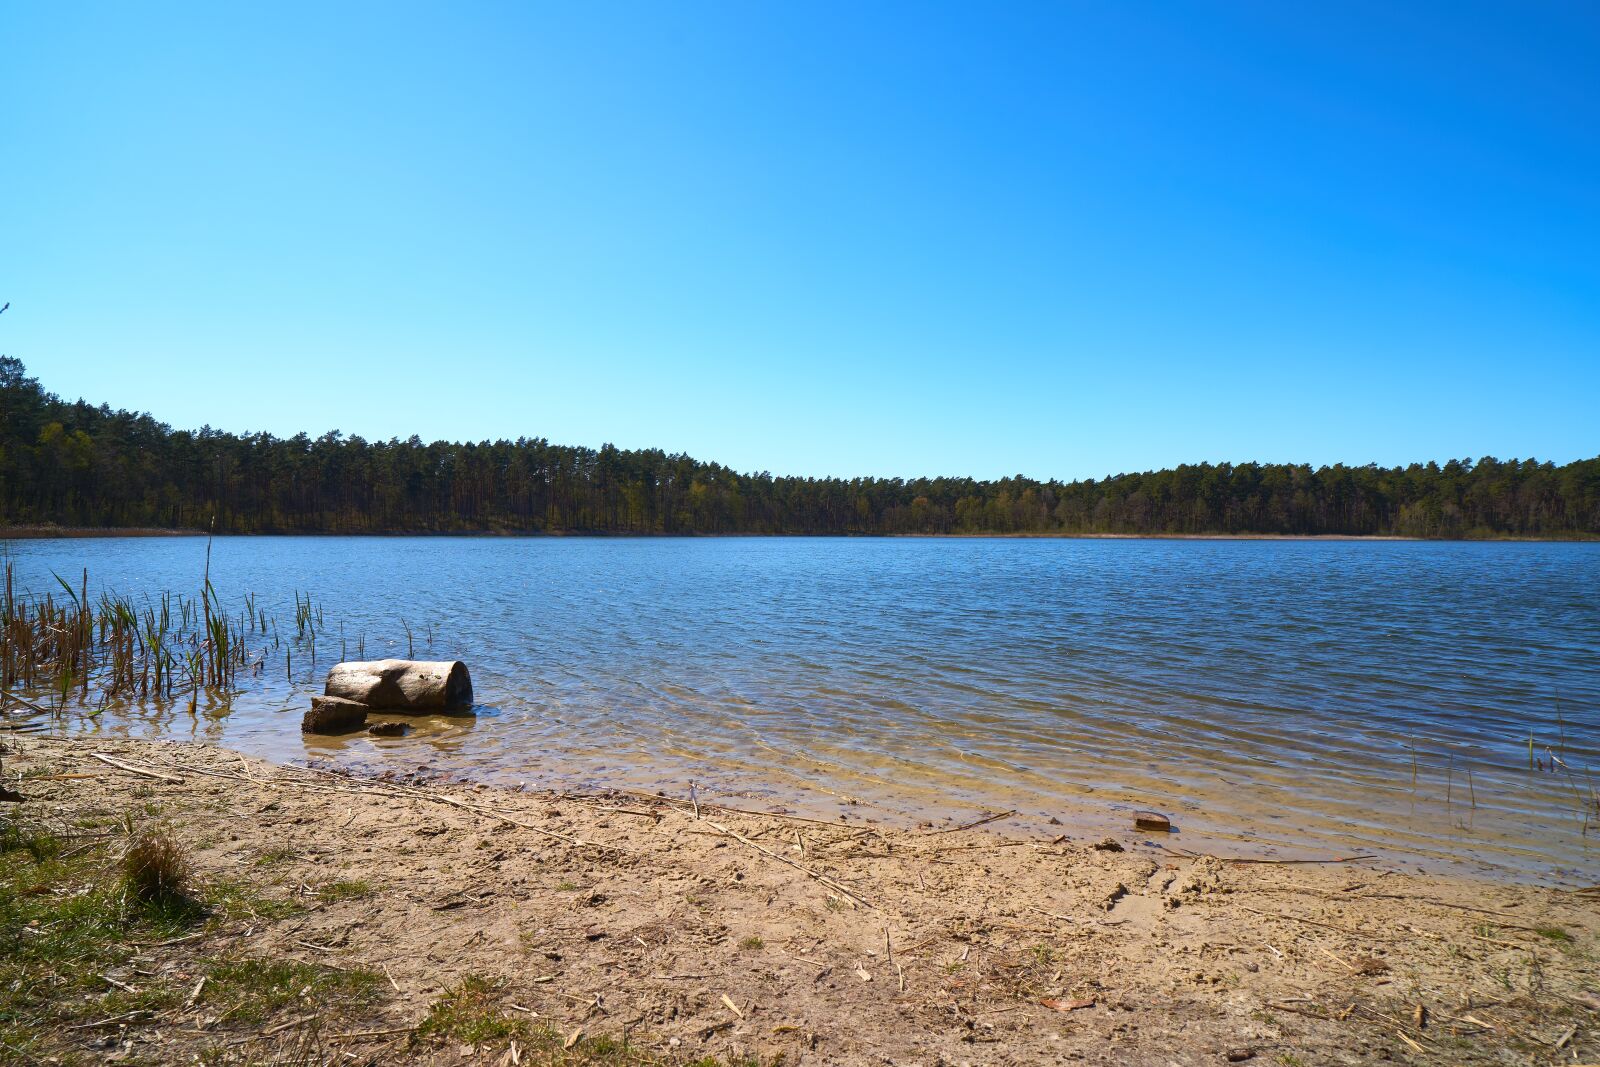 ZEISS Batis 18mm F2.8 sample photo. Lake, blue, sky photography